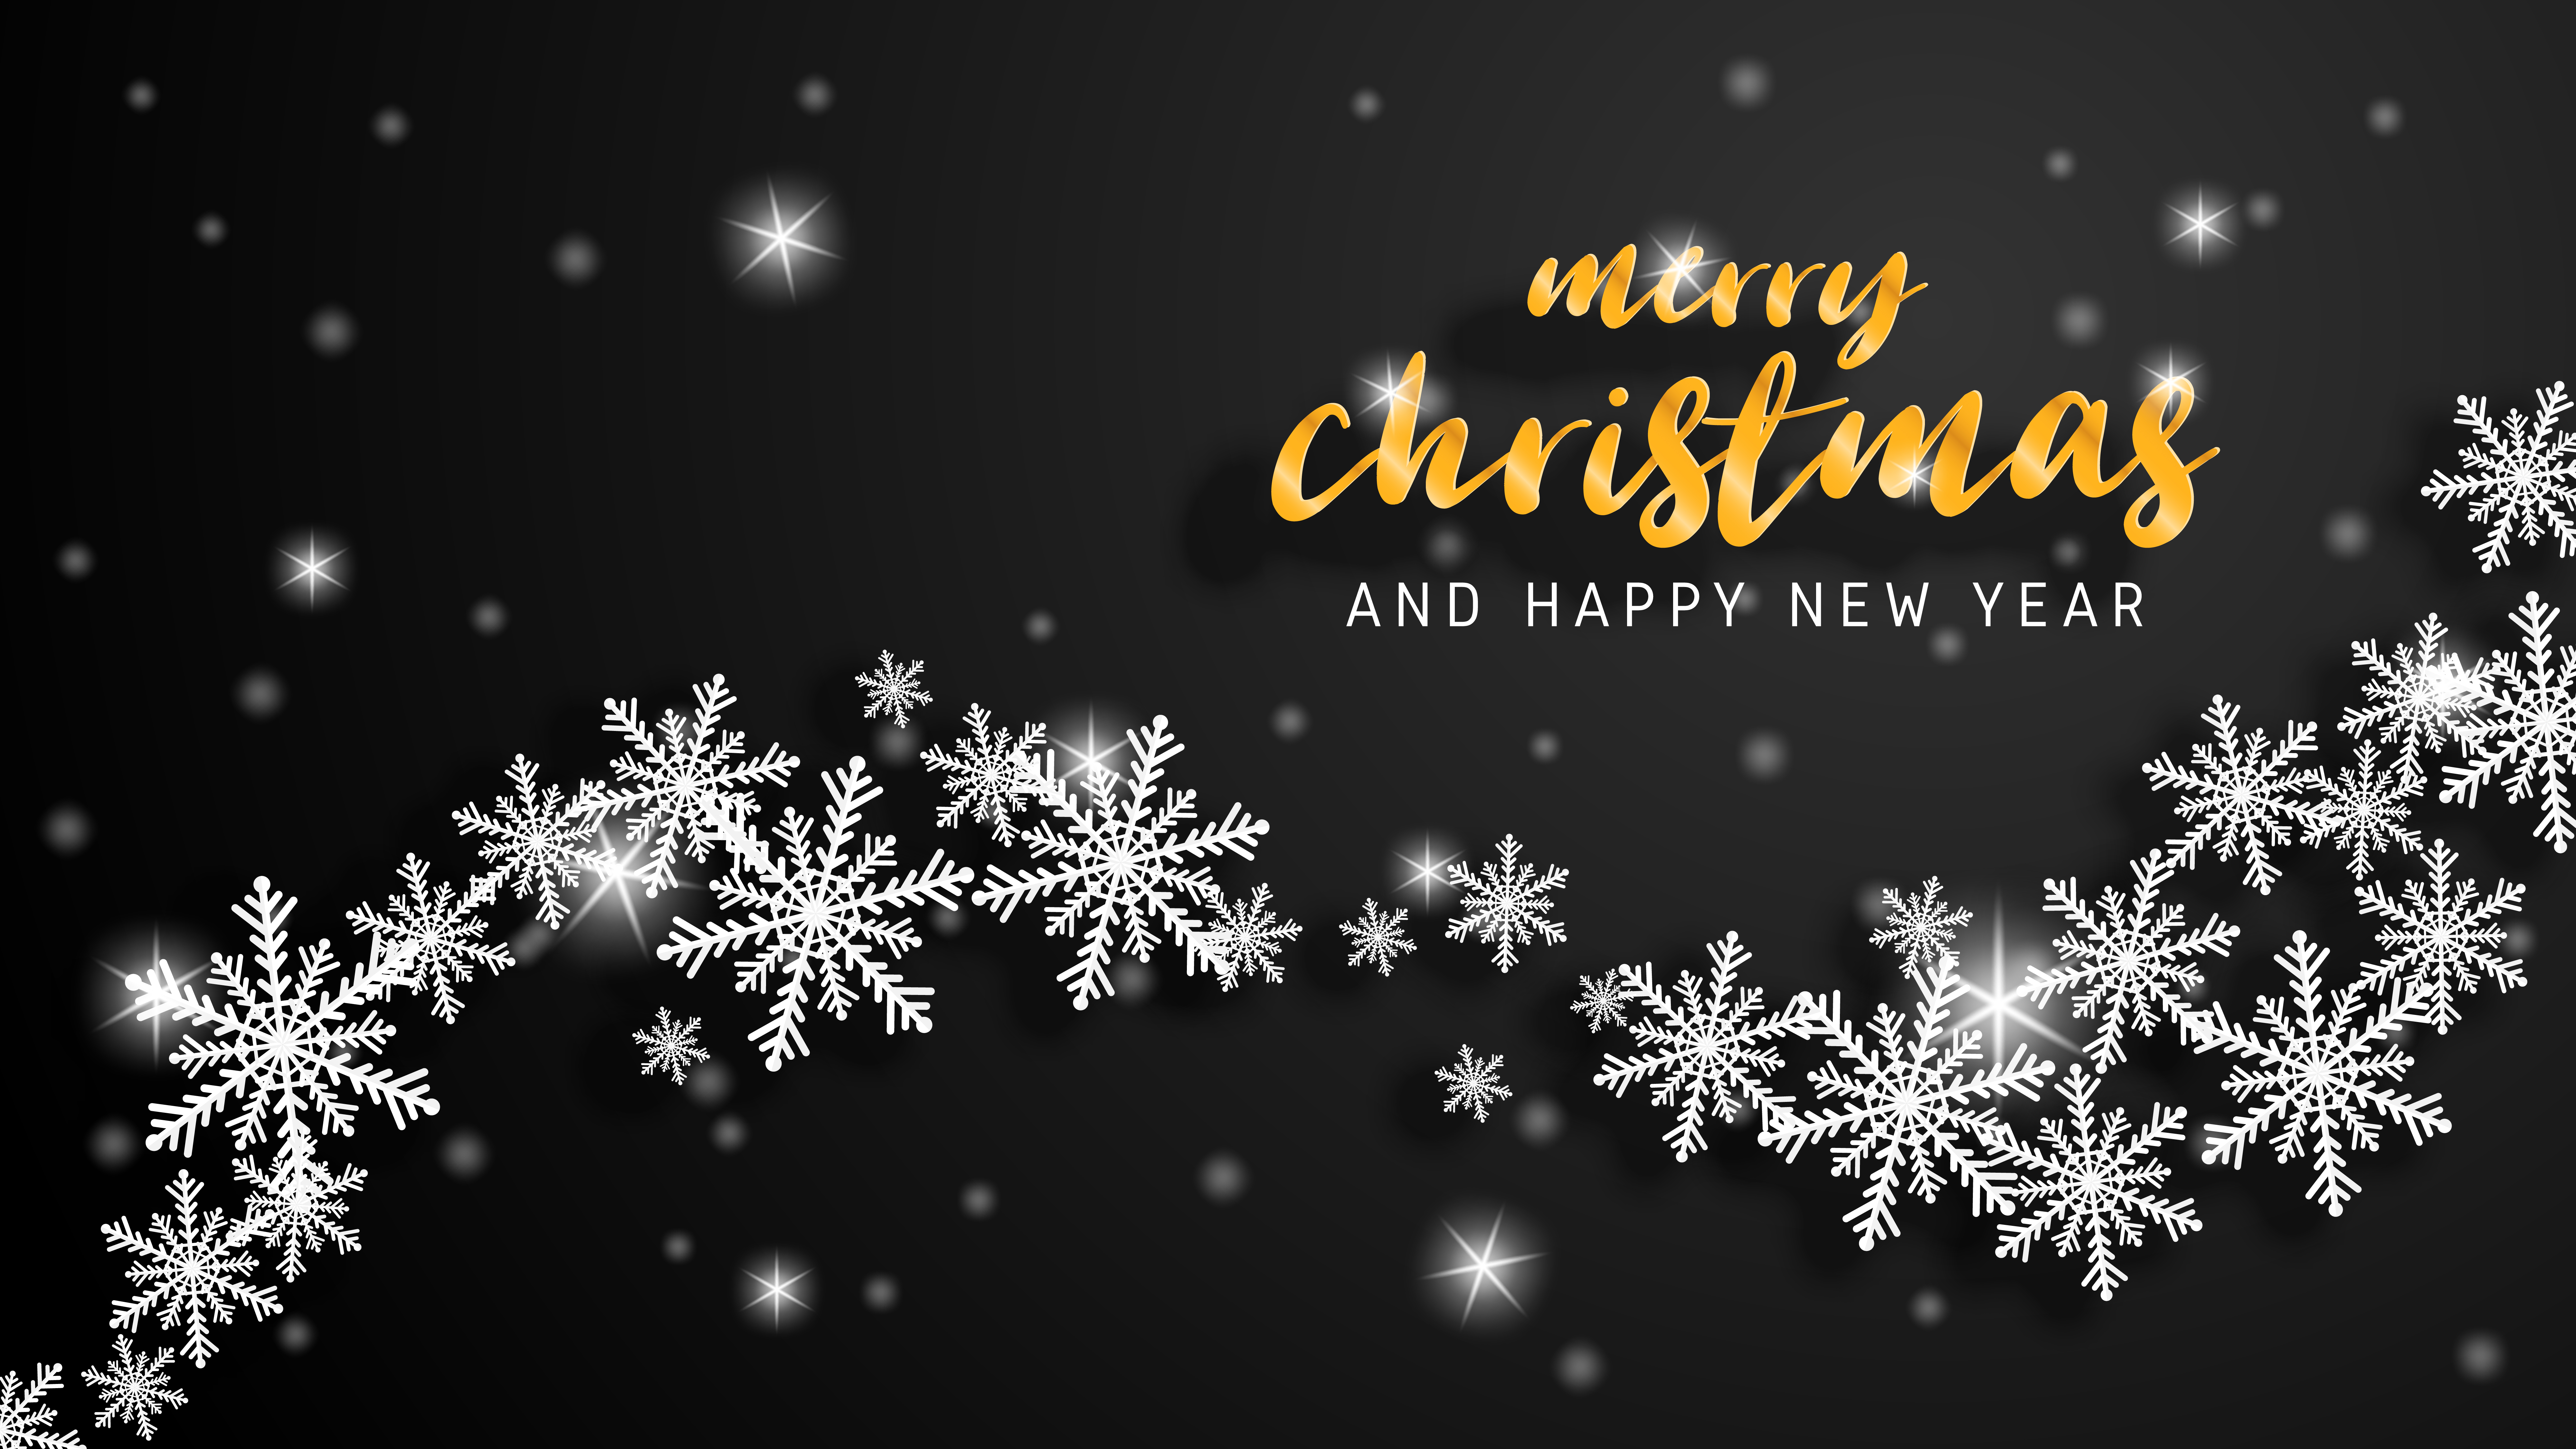 Merry Christmas And Happy New Year Greeting Card In - Merry Christmas Wallpaper Black - HD Wallpaper 